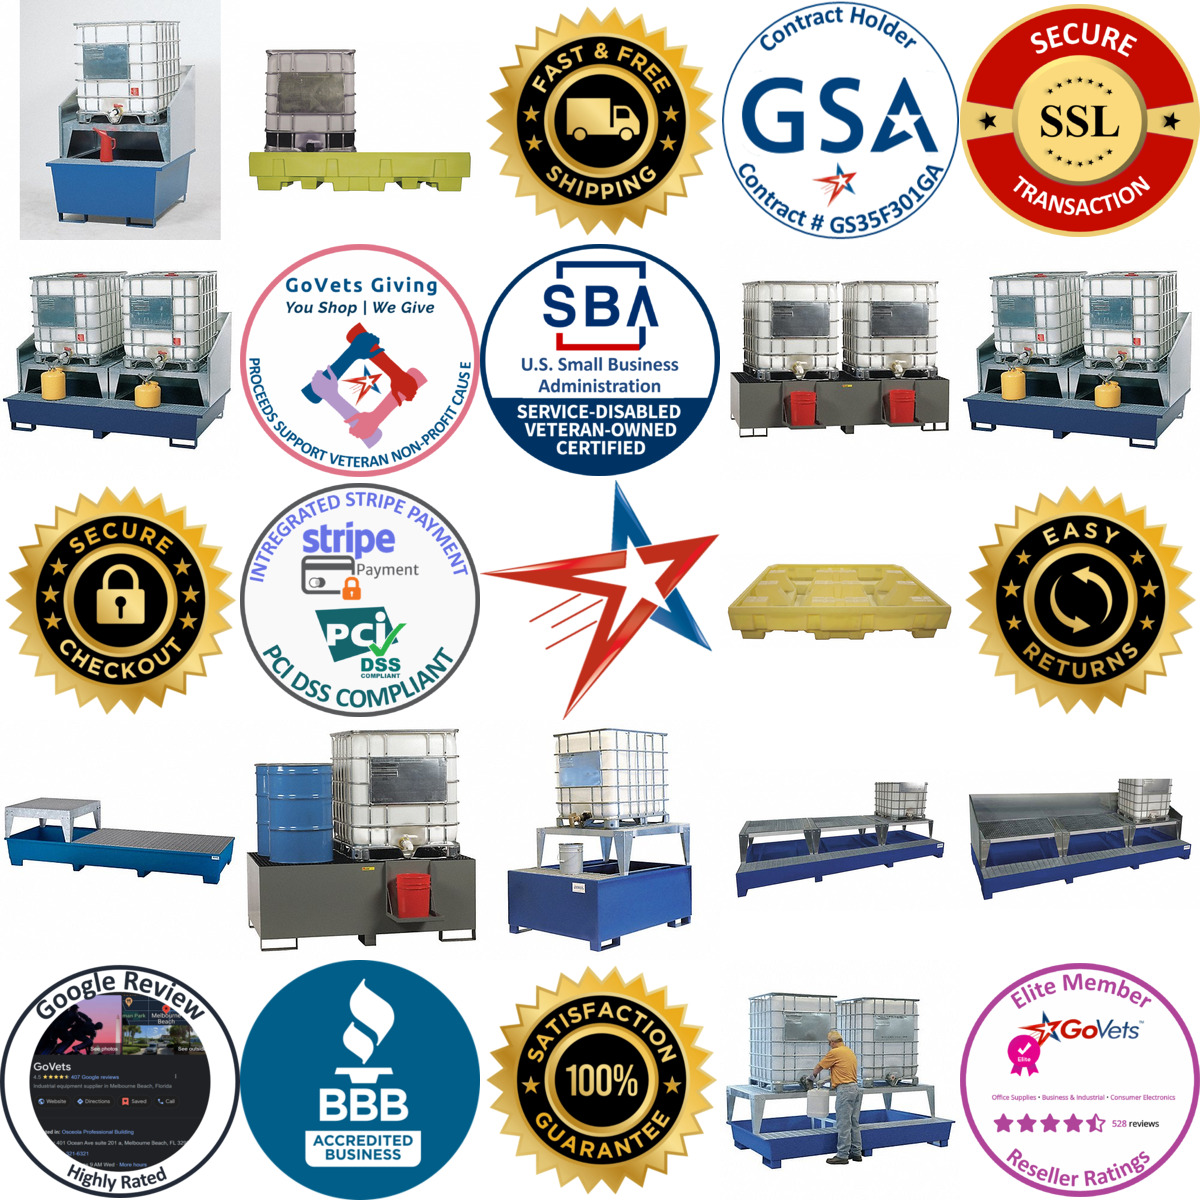 A selection of Ibc Dispensing Stations products on GoVets